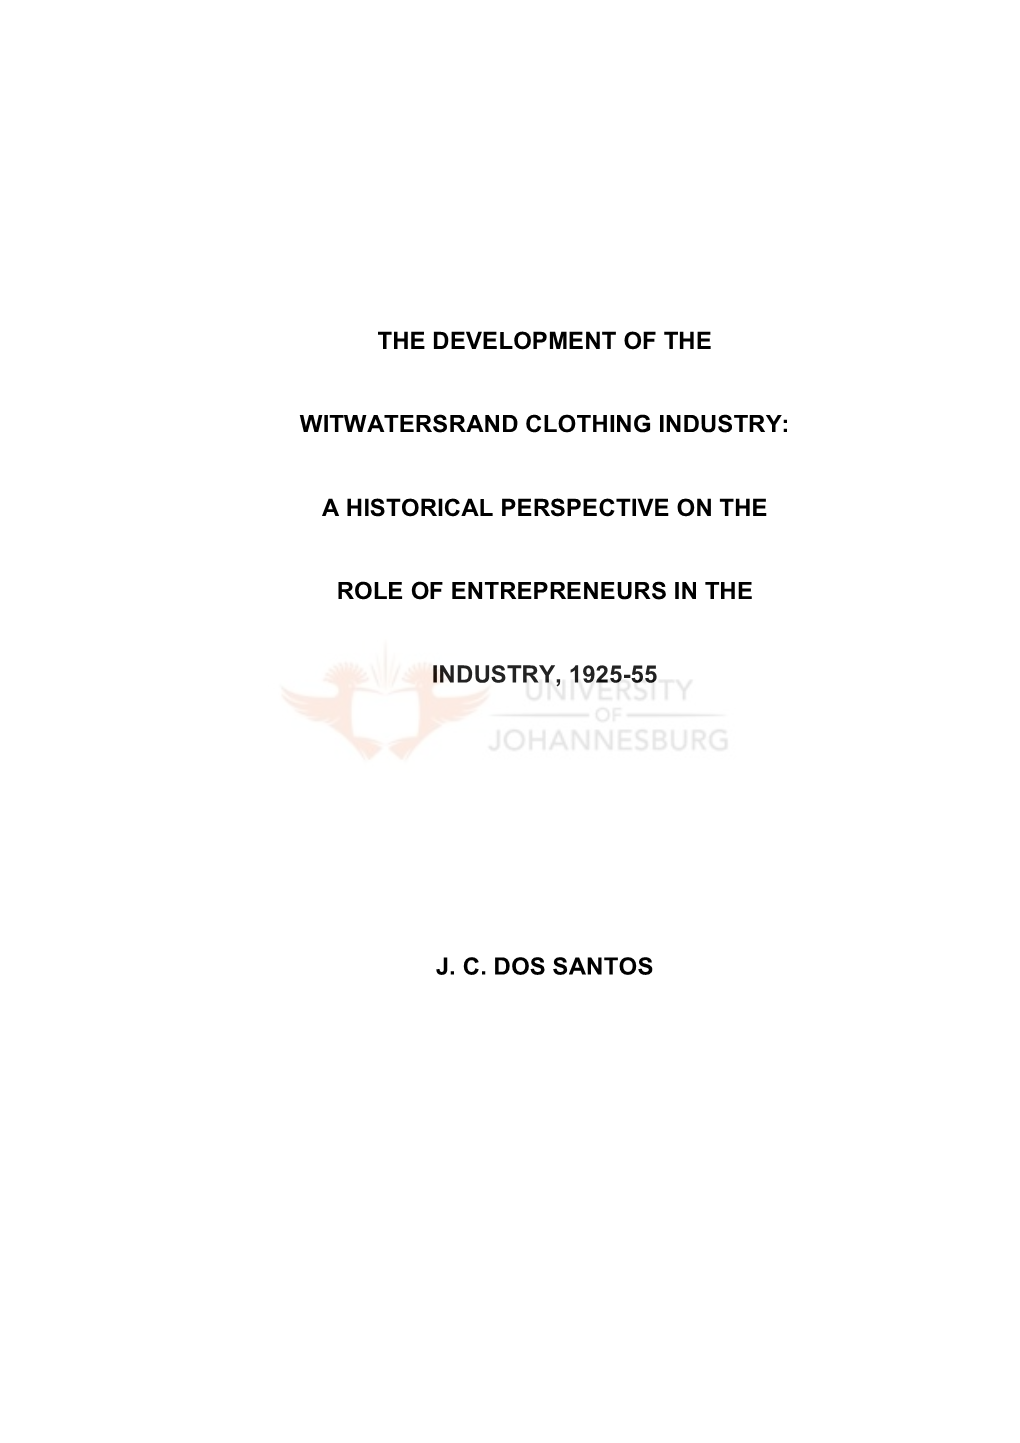 The Development of the Witwatersrand Clothing Industry: a Historical Perspective on the Role of Entrepreneurs in the Industry, 1925 – 55